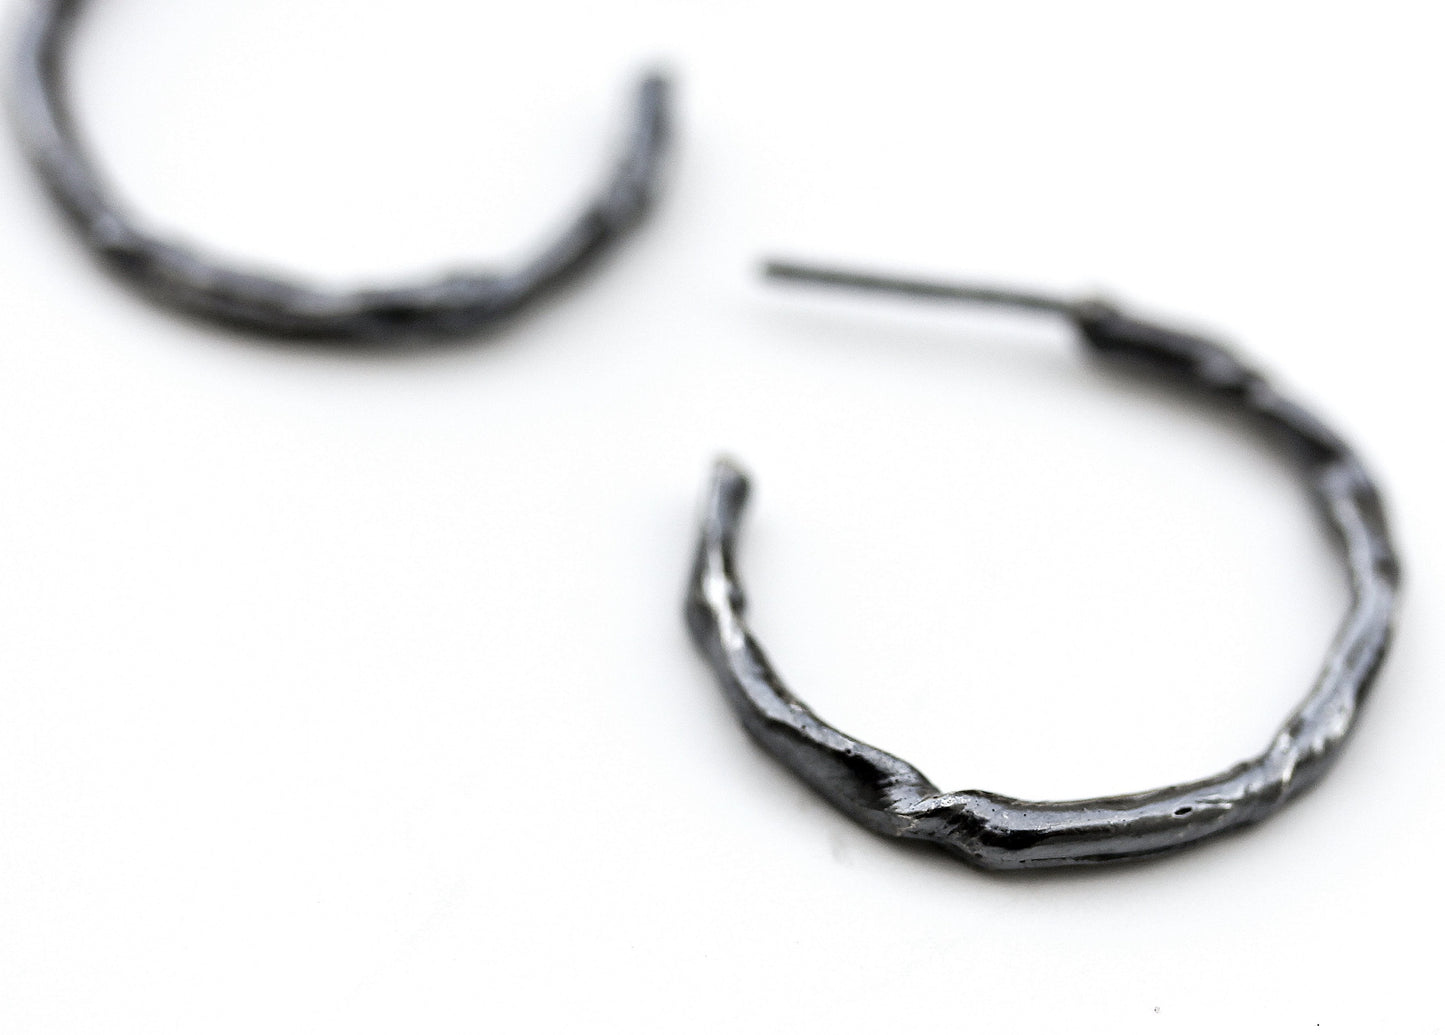 Detail photo of a blackened silver hoop earring with an organic vine-like texture.